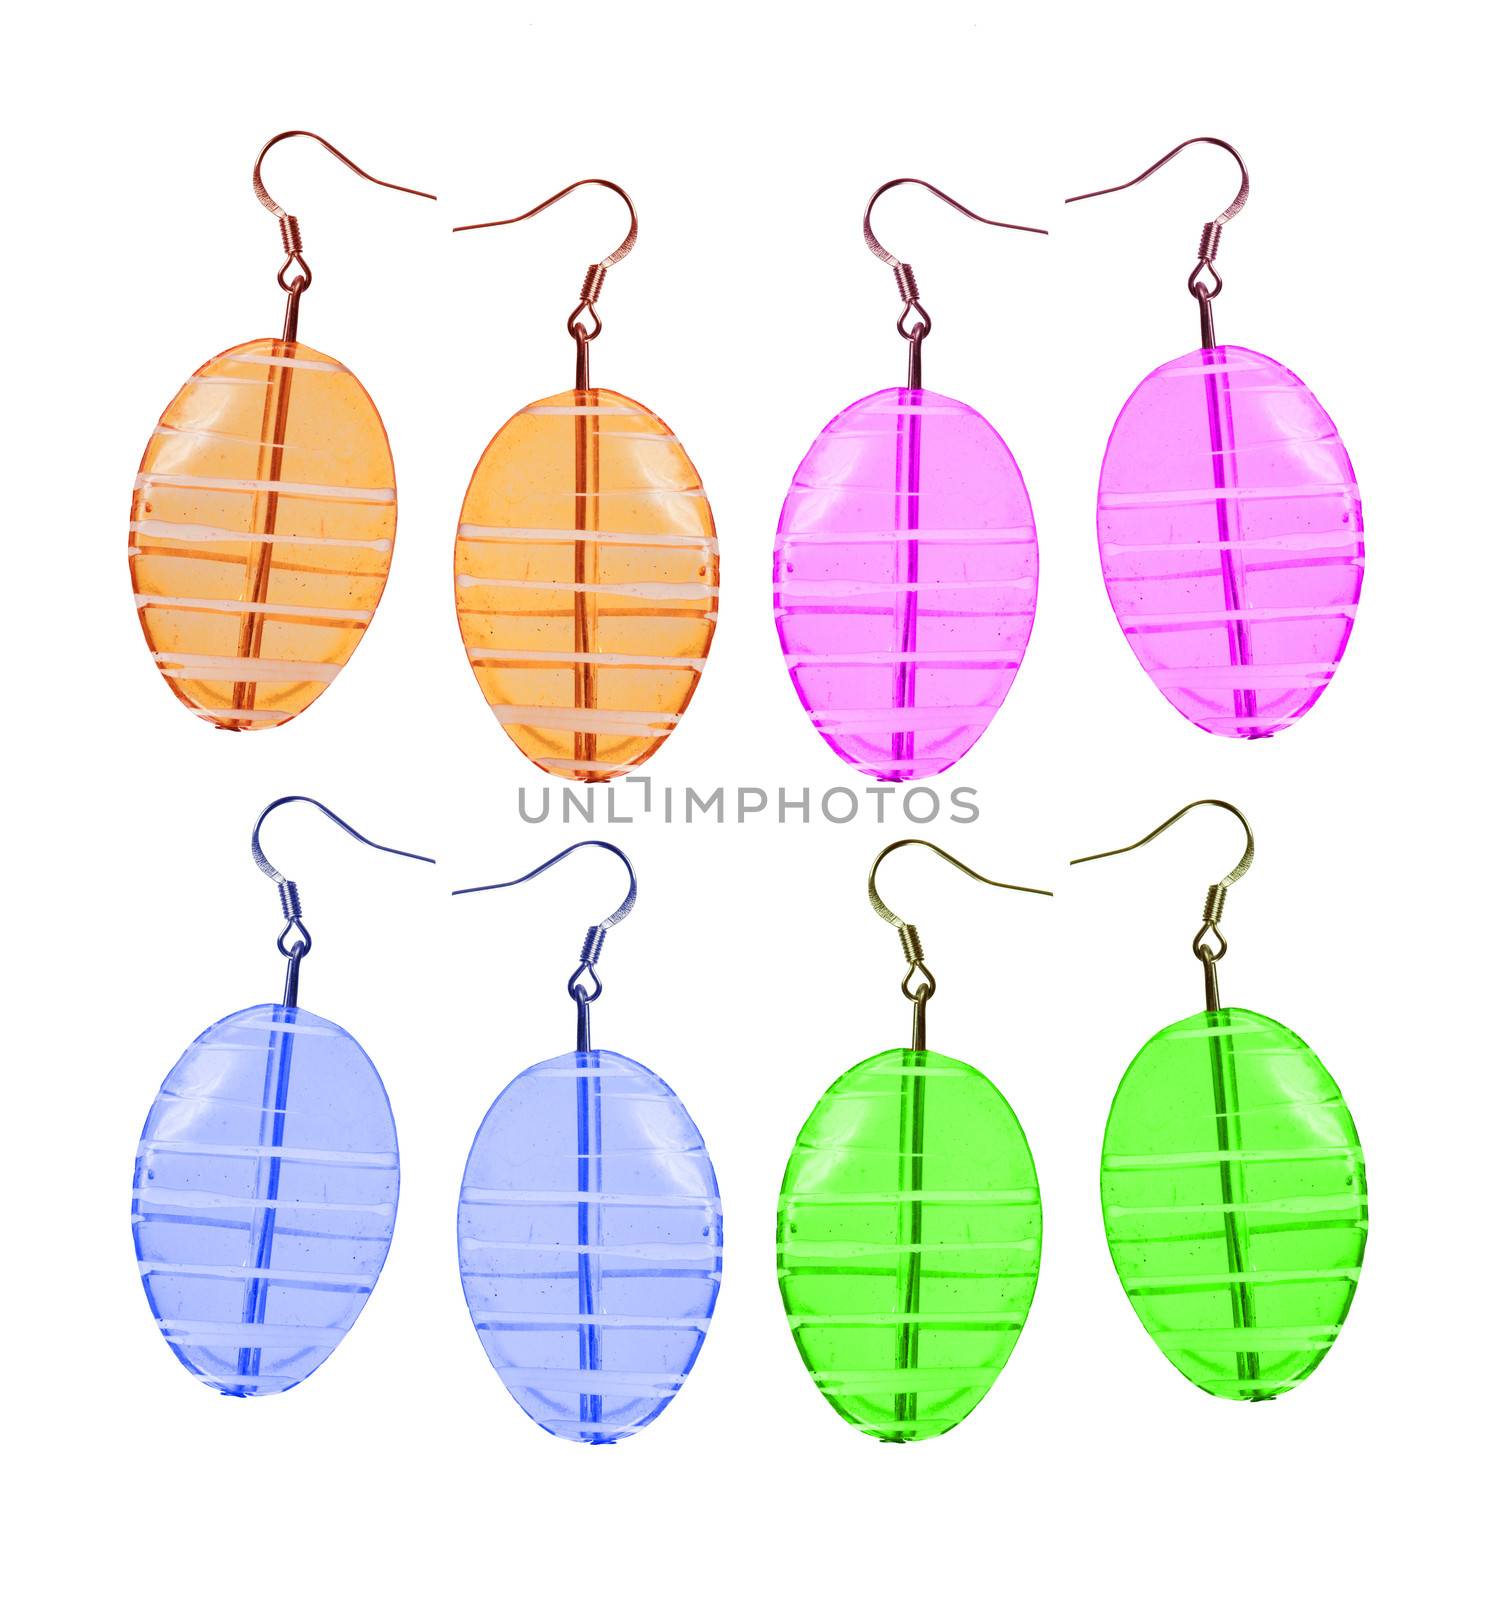 Earrings made and glass isolated on white background in different colors. Four pairs. Collage.

